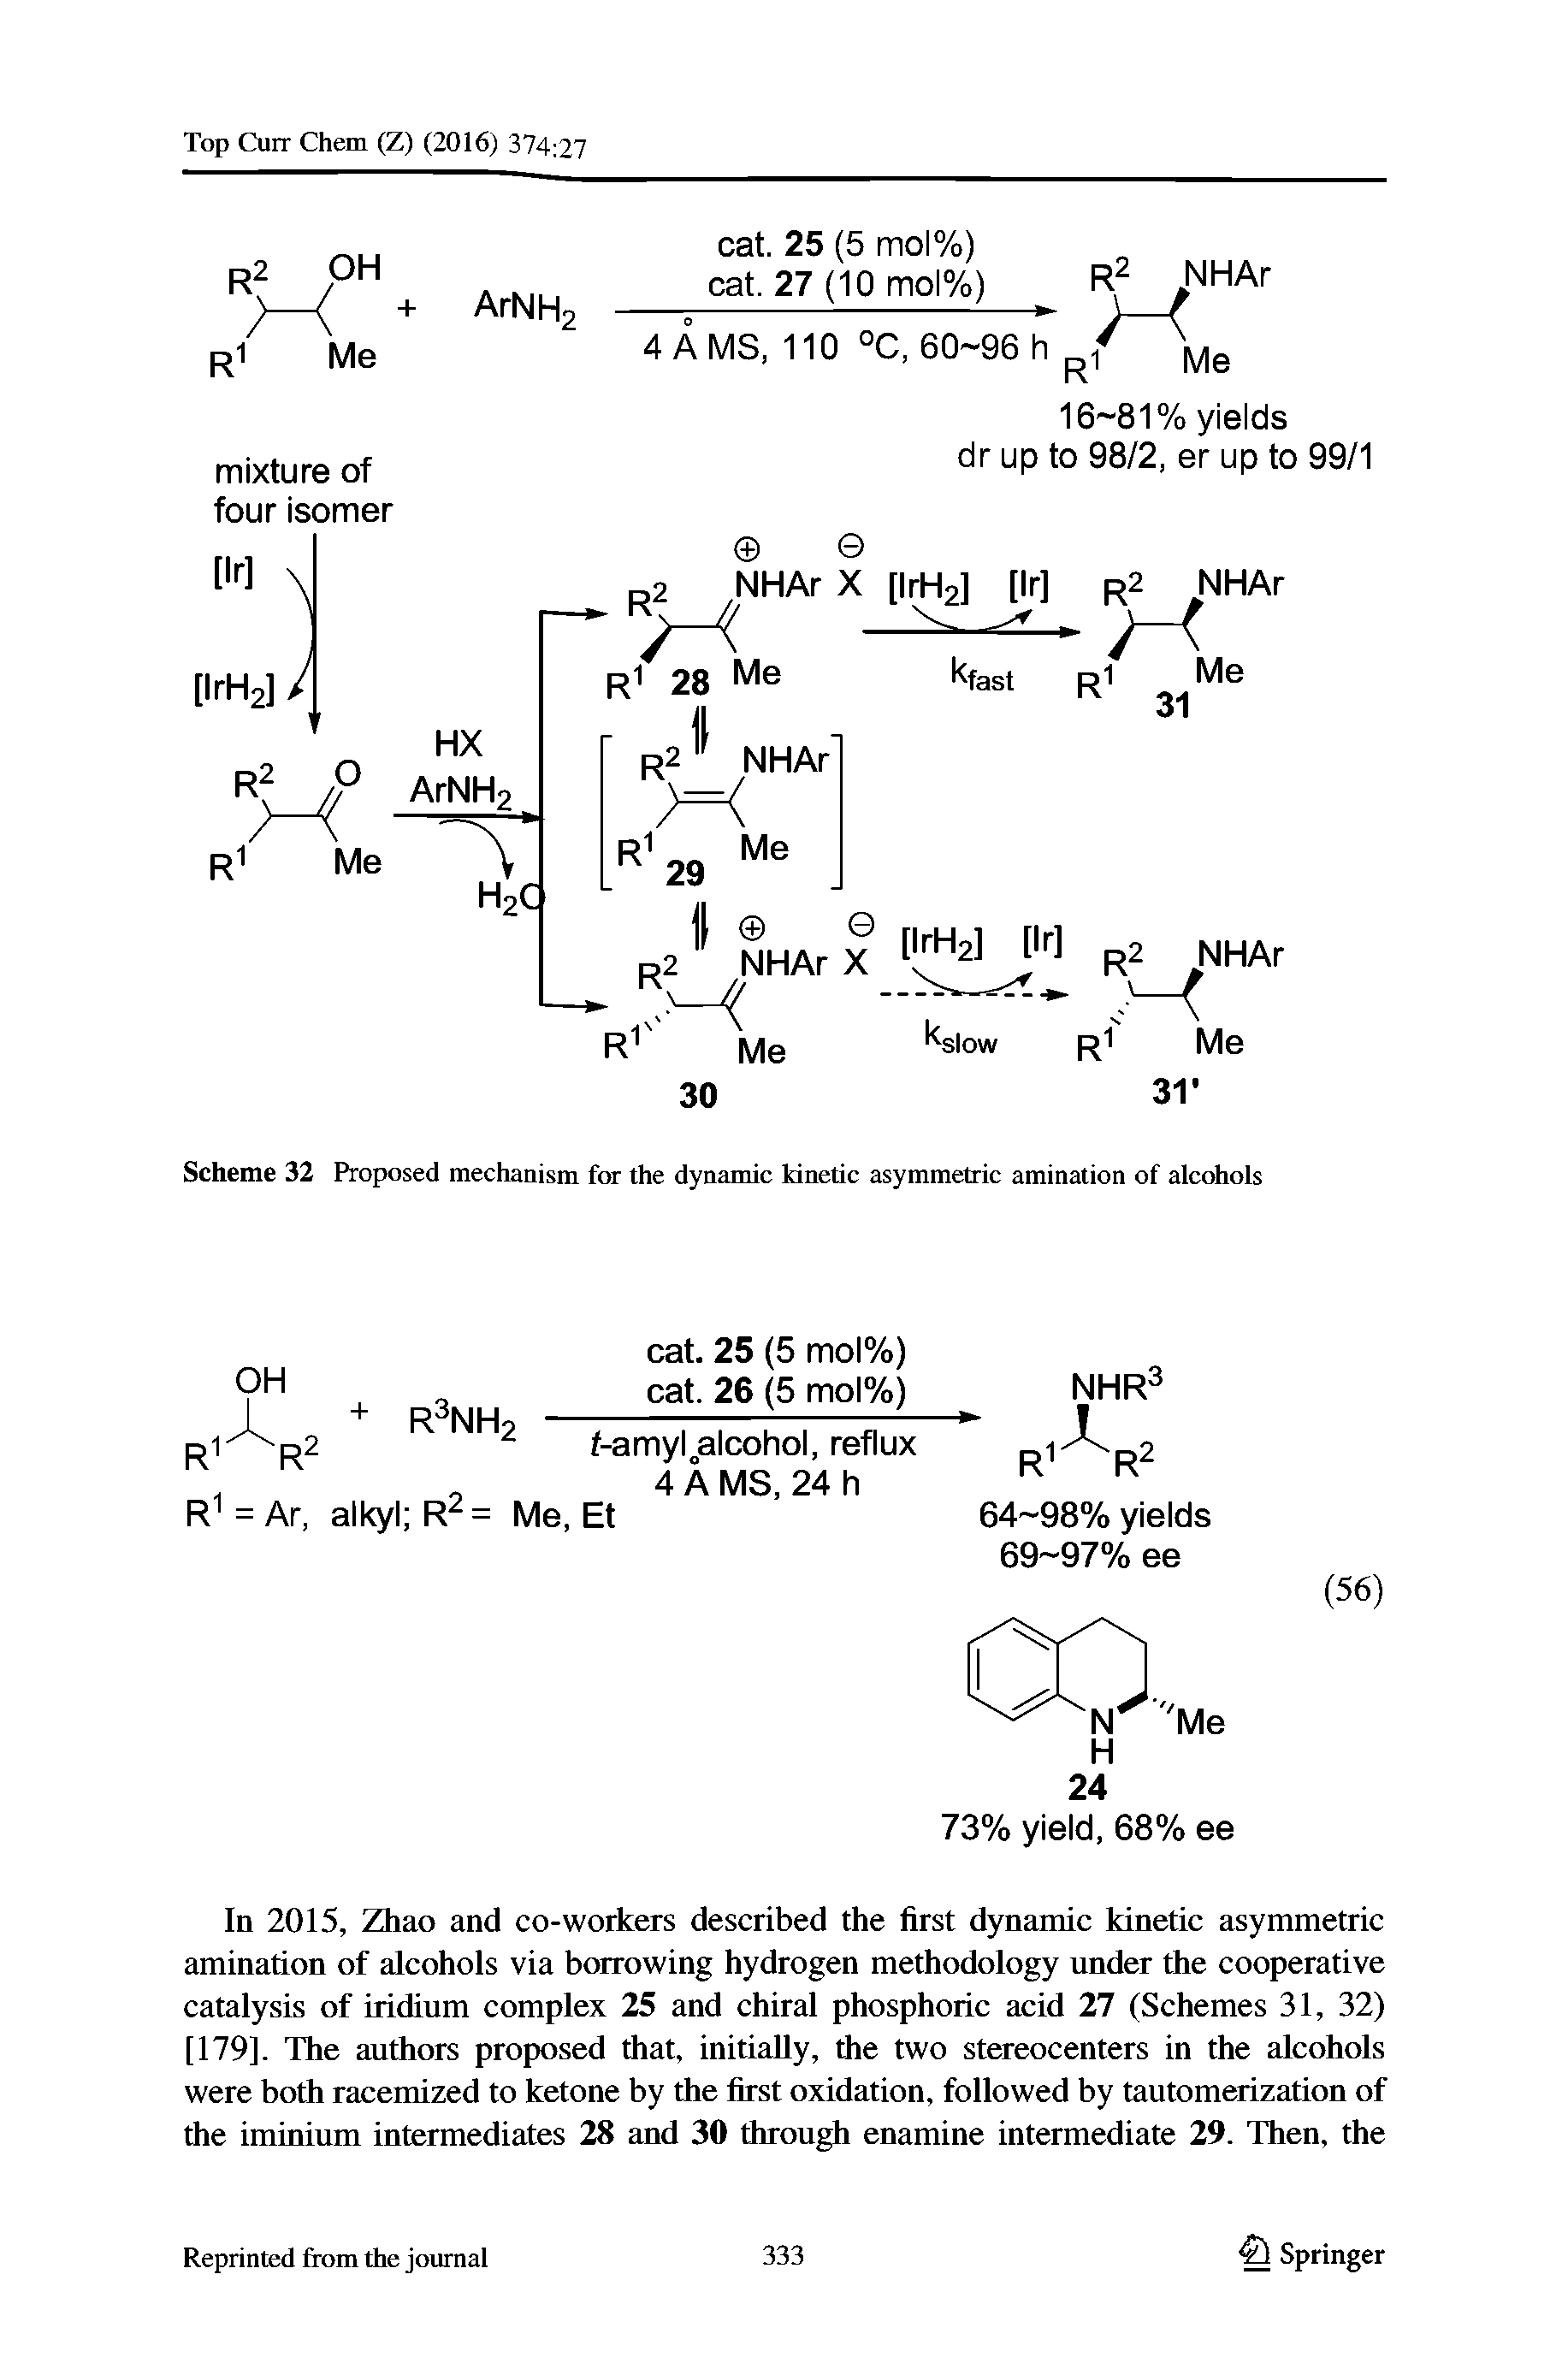 Scheme 32 Proposed mechanism for the dynamic Mnetic asymmetric amination of alcohols...